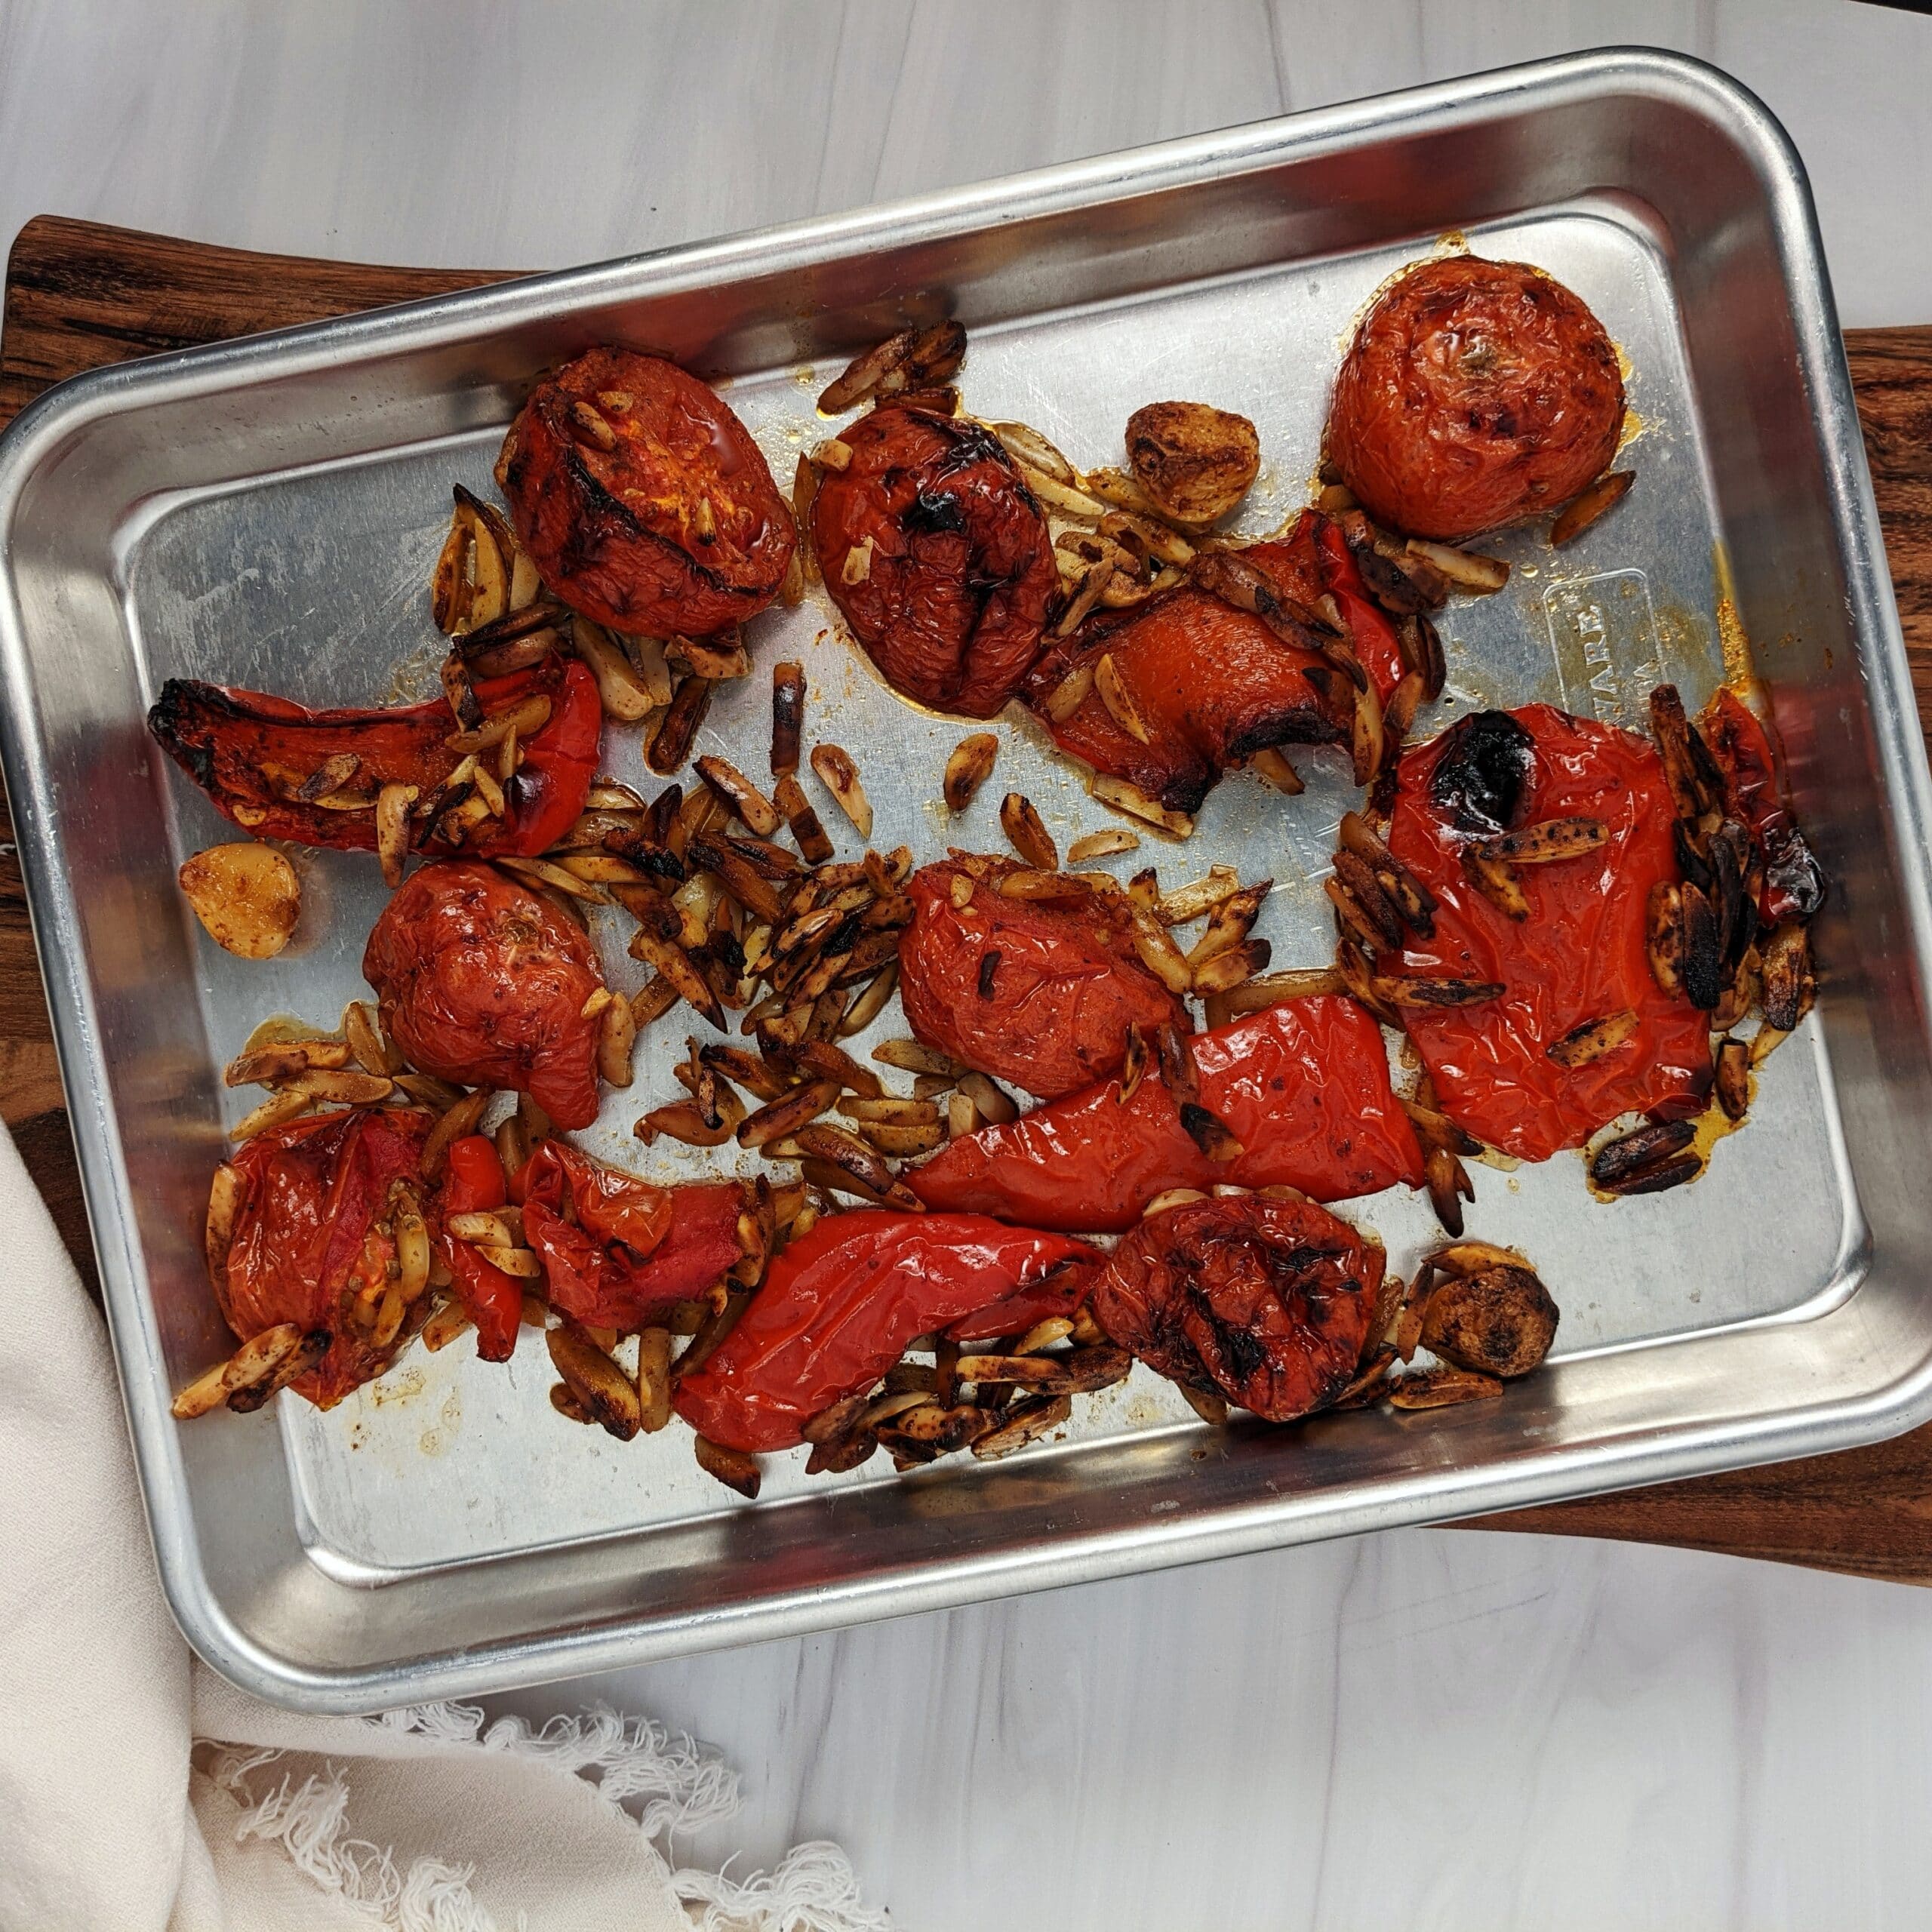 roasted tomatoes, garlic, red peppers, and almonds